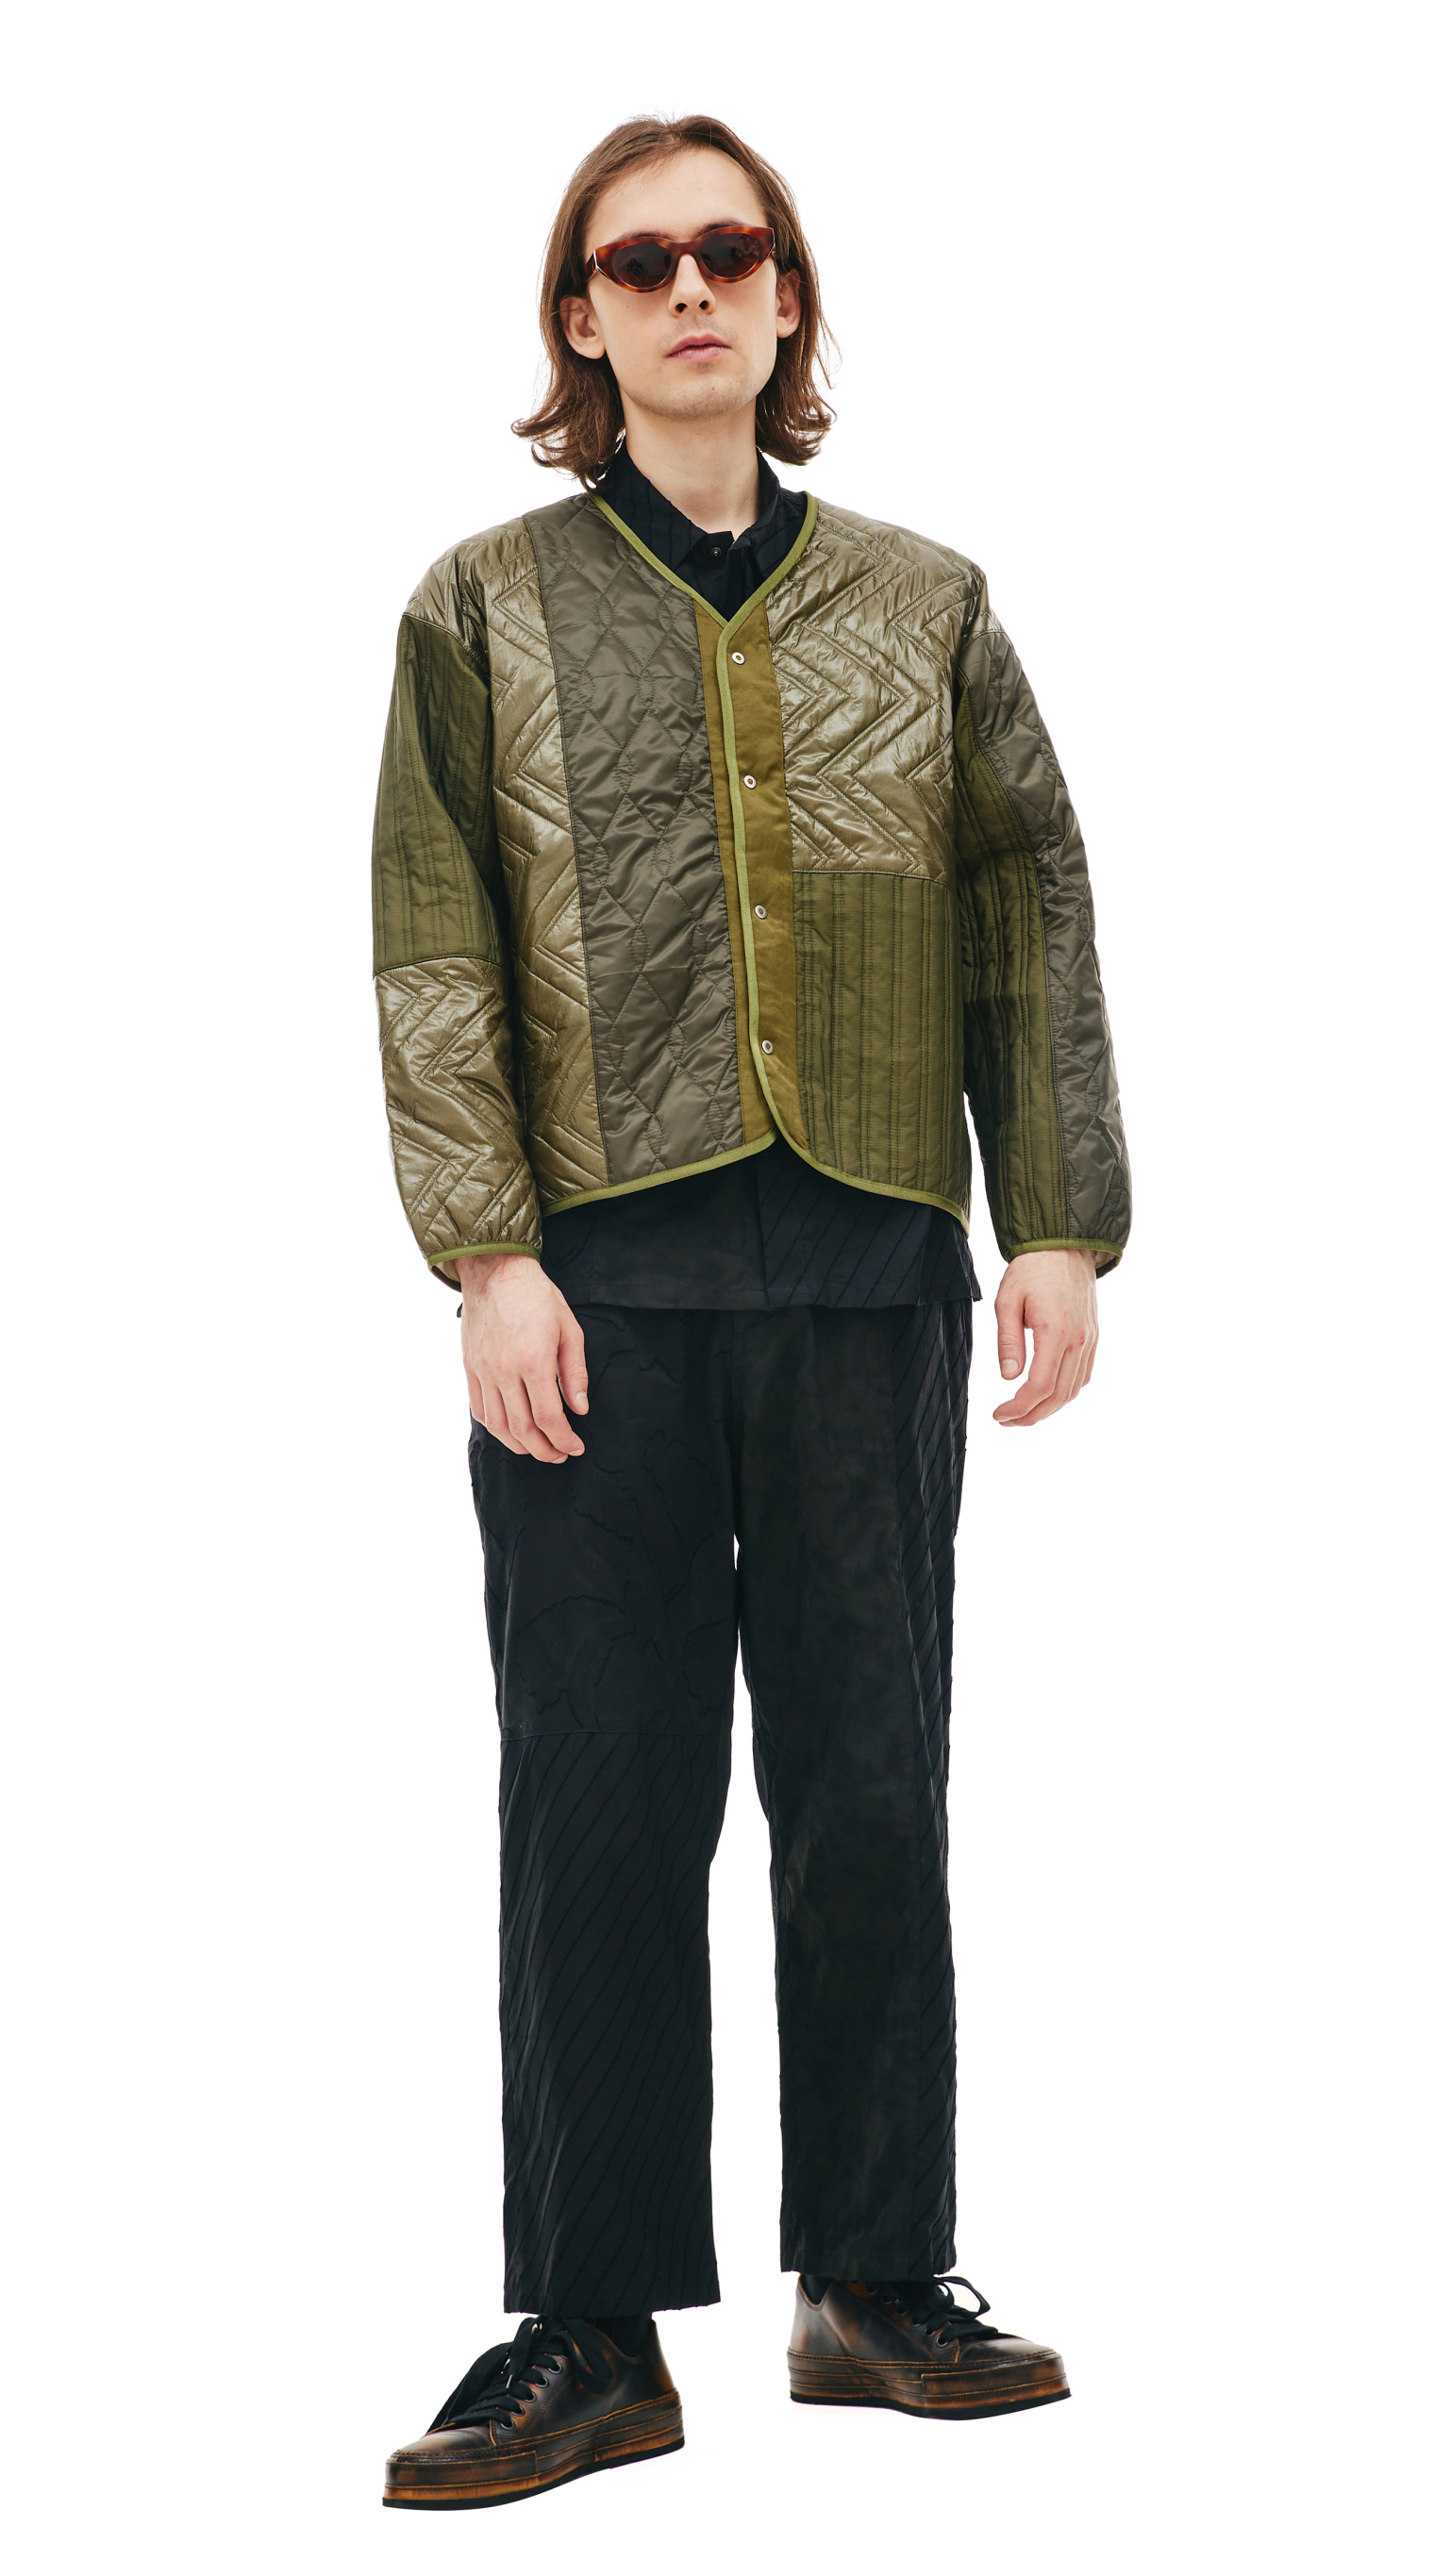 KIMMY Green quilted jacket